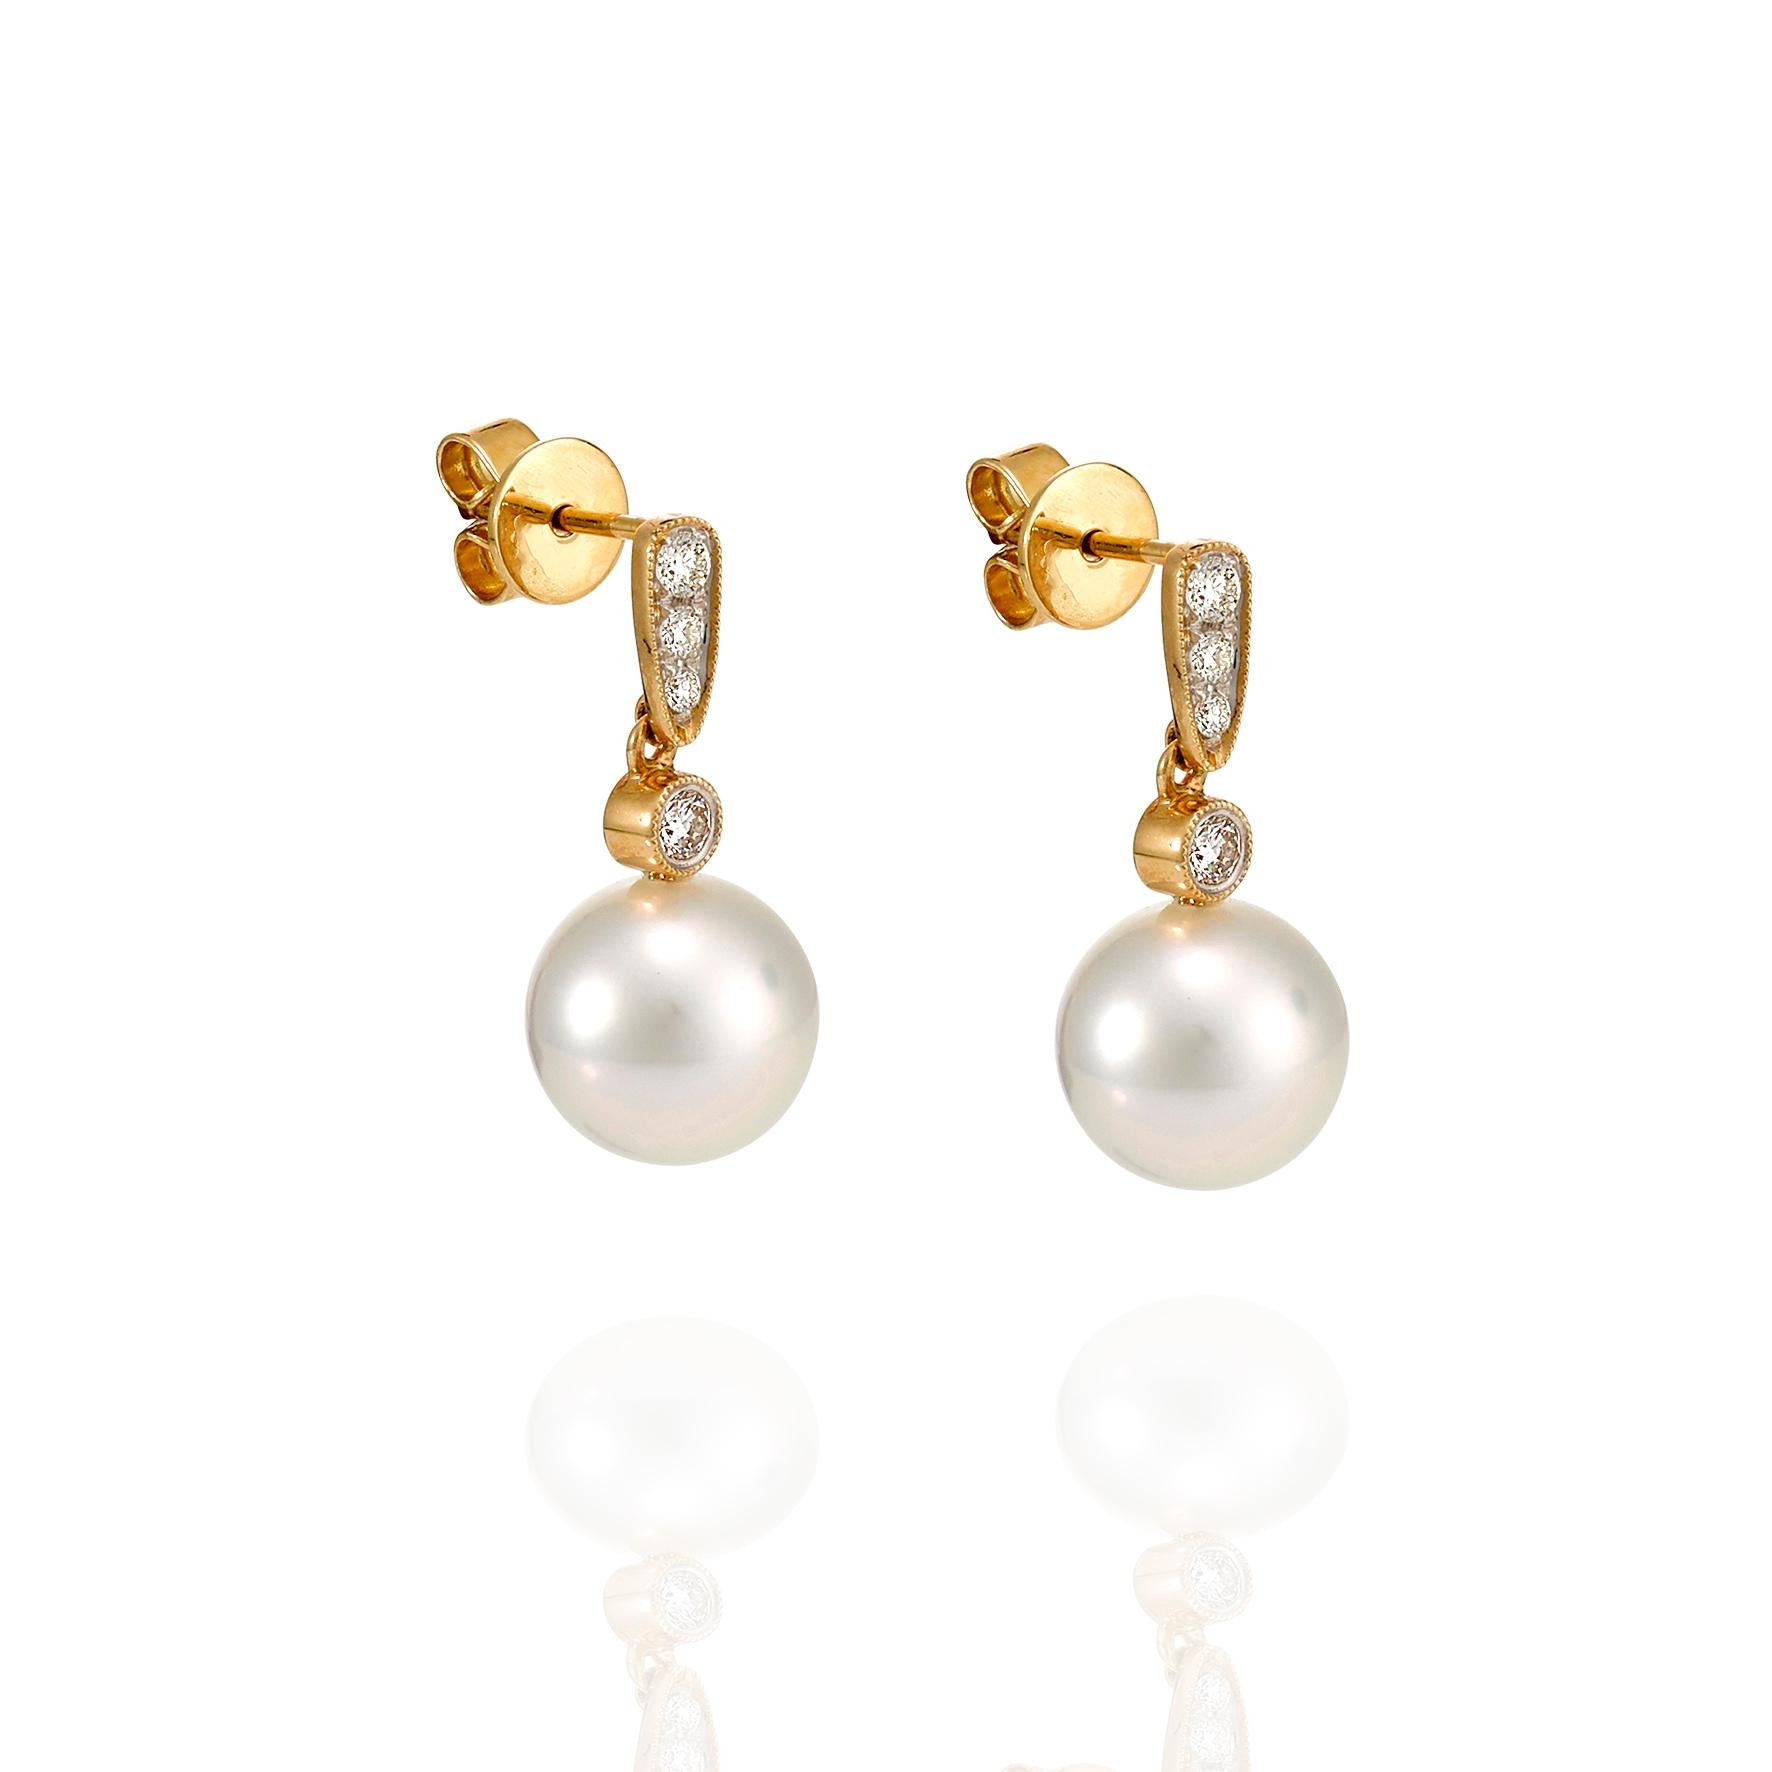 Giulians 18 karat Golden South Sea Pearl and Diamond Earrings.  Each earring features a 9.50mm round, white cultured pearl with a bright lustre and smooth surface.  The pearls have been set into 18 karat yellow and white gold and diamond drops set